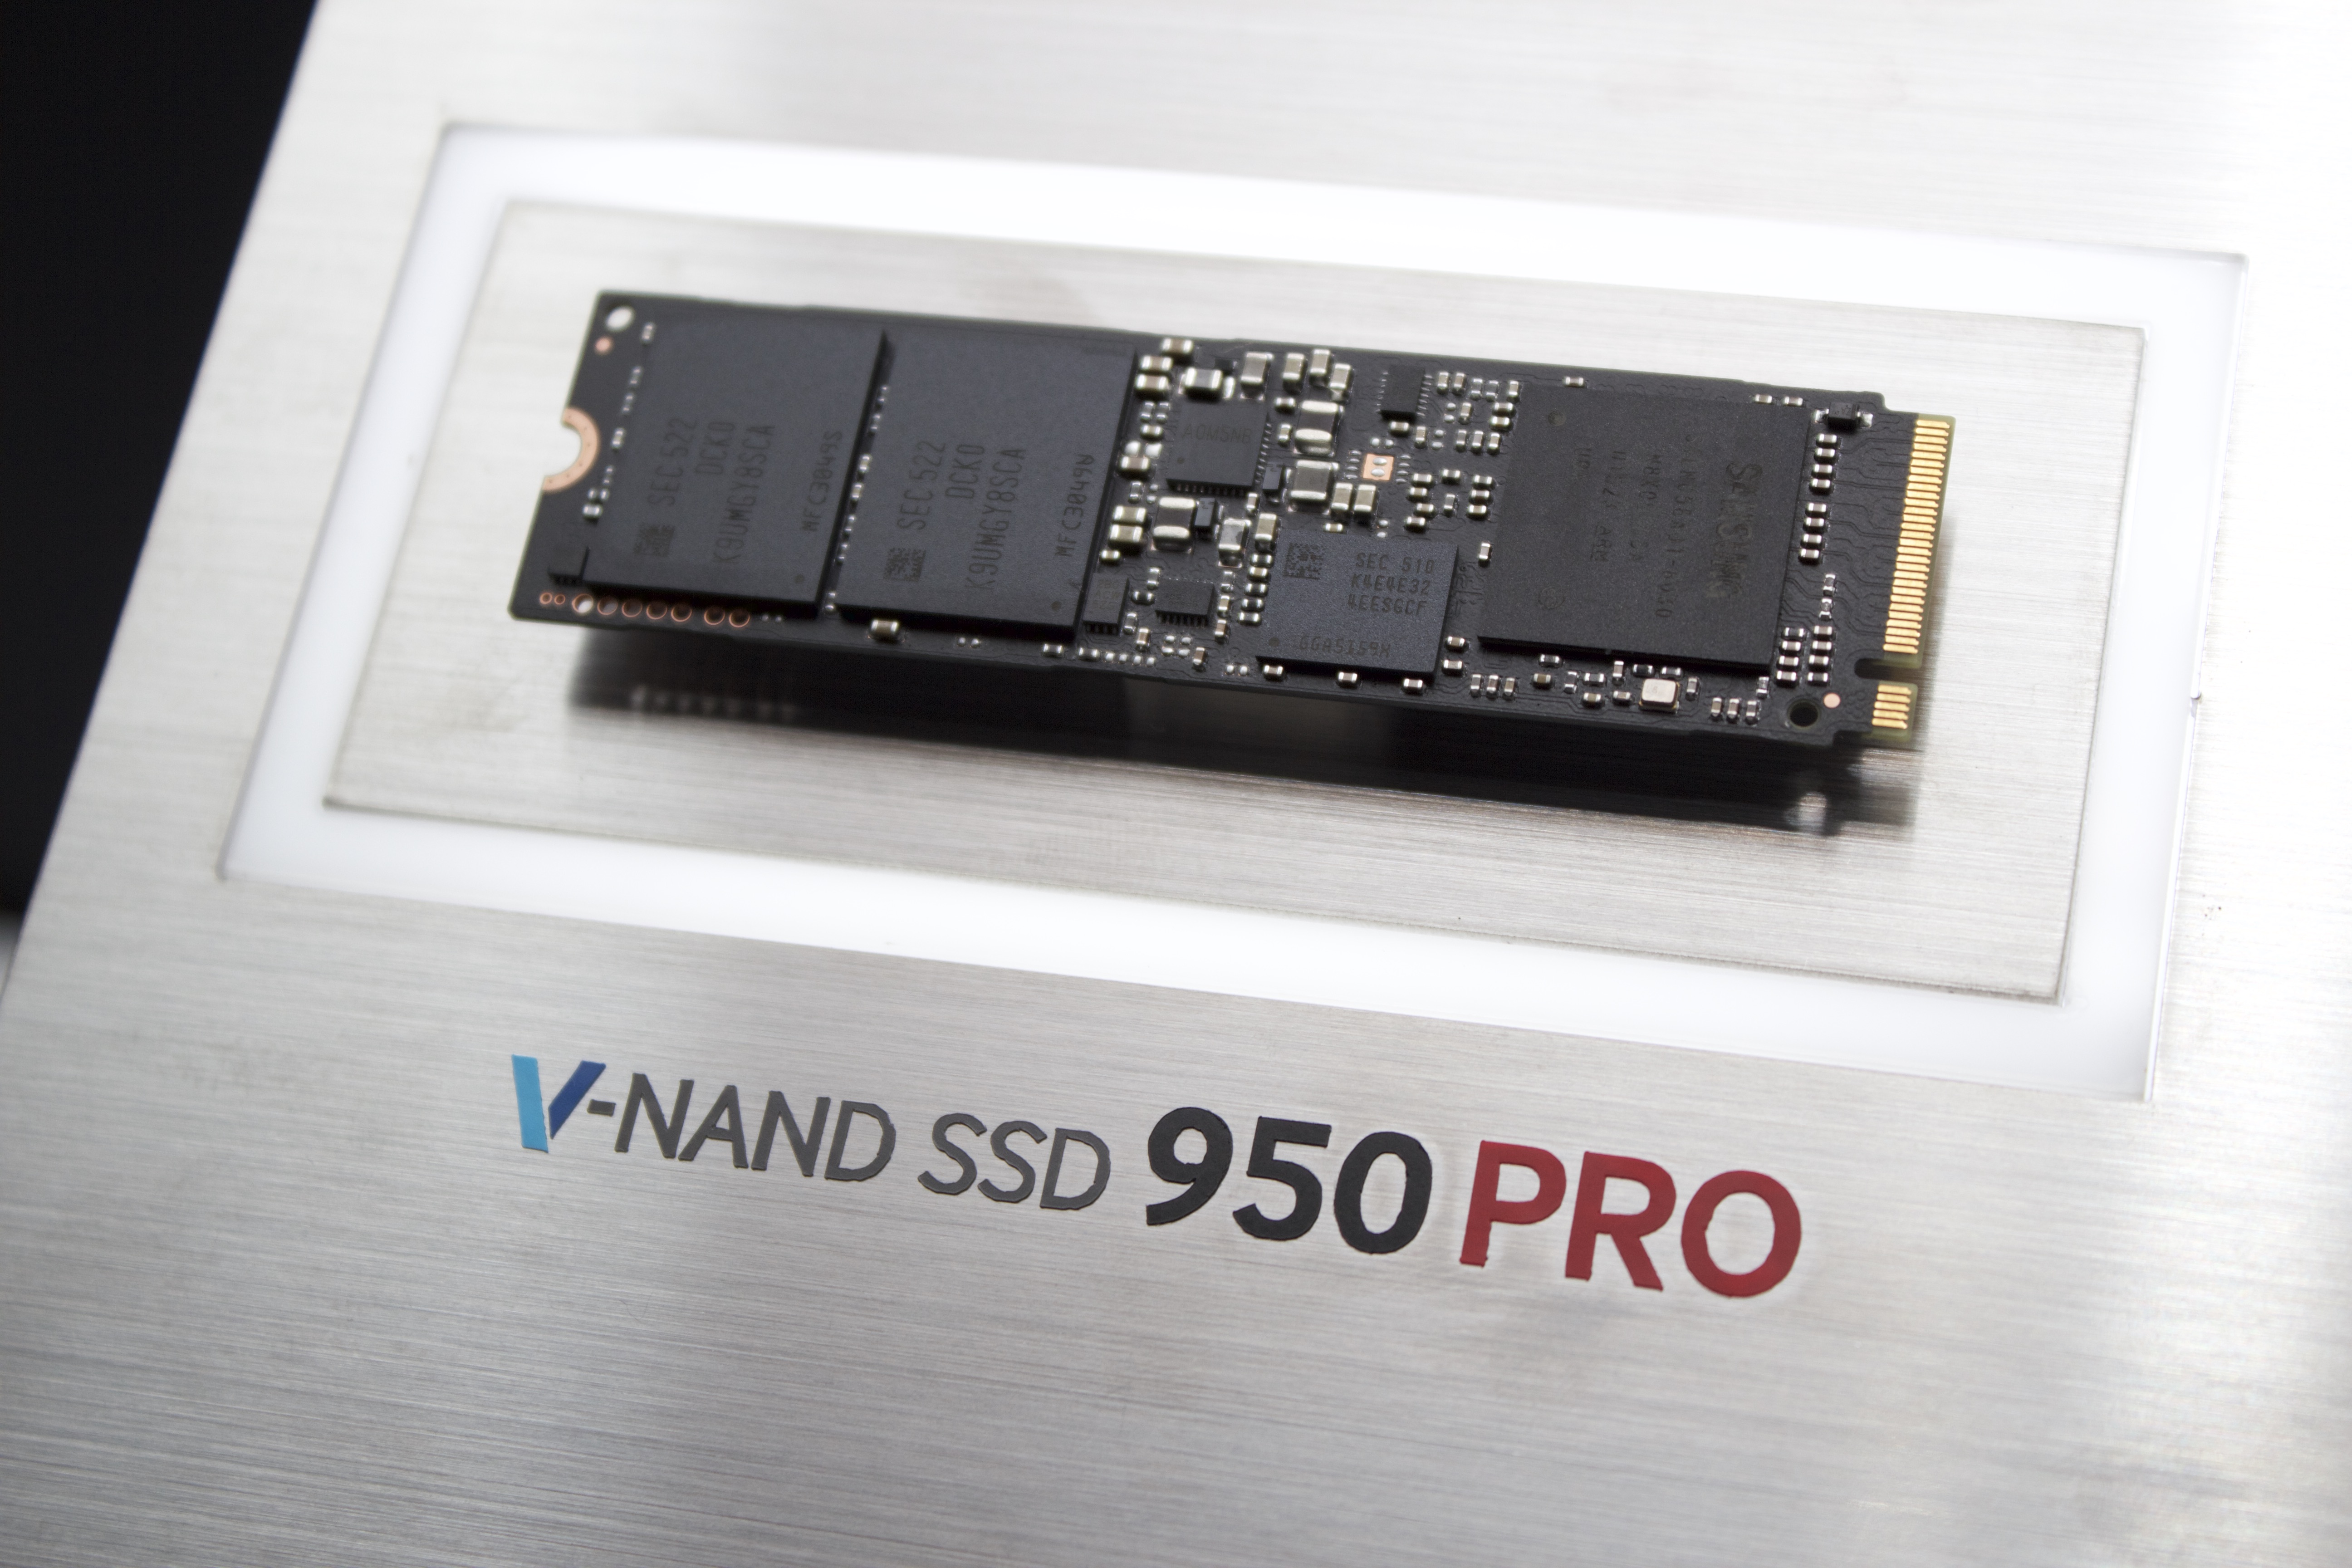 2015 Samsung SSD Global Summit: Samsung Launches 950 Pro SSD